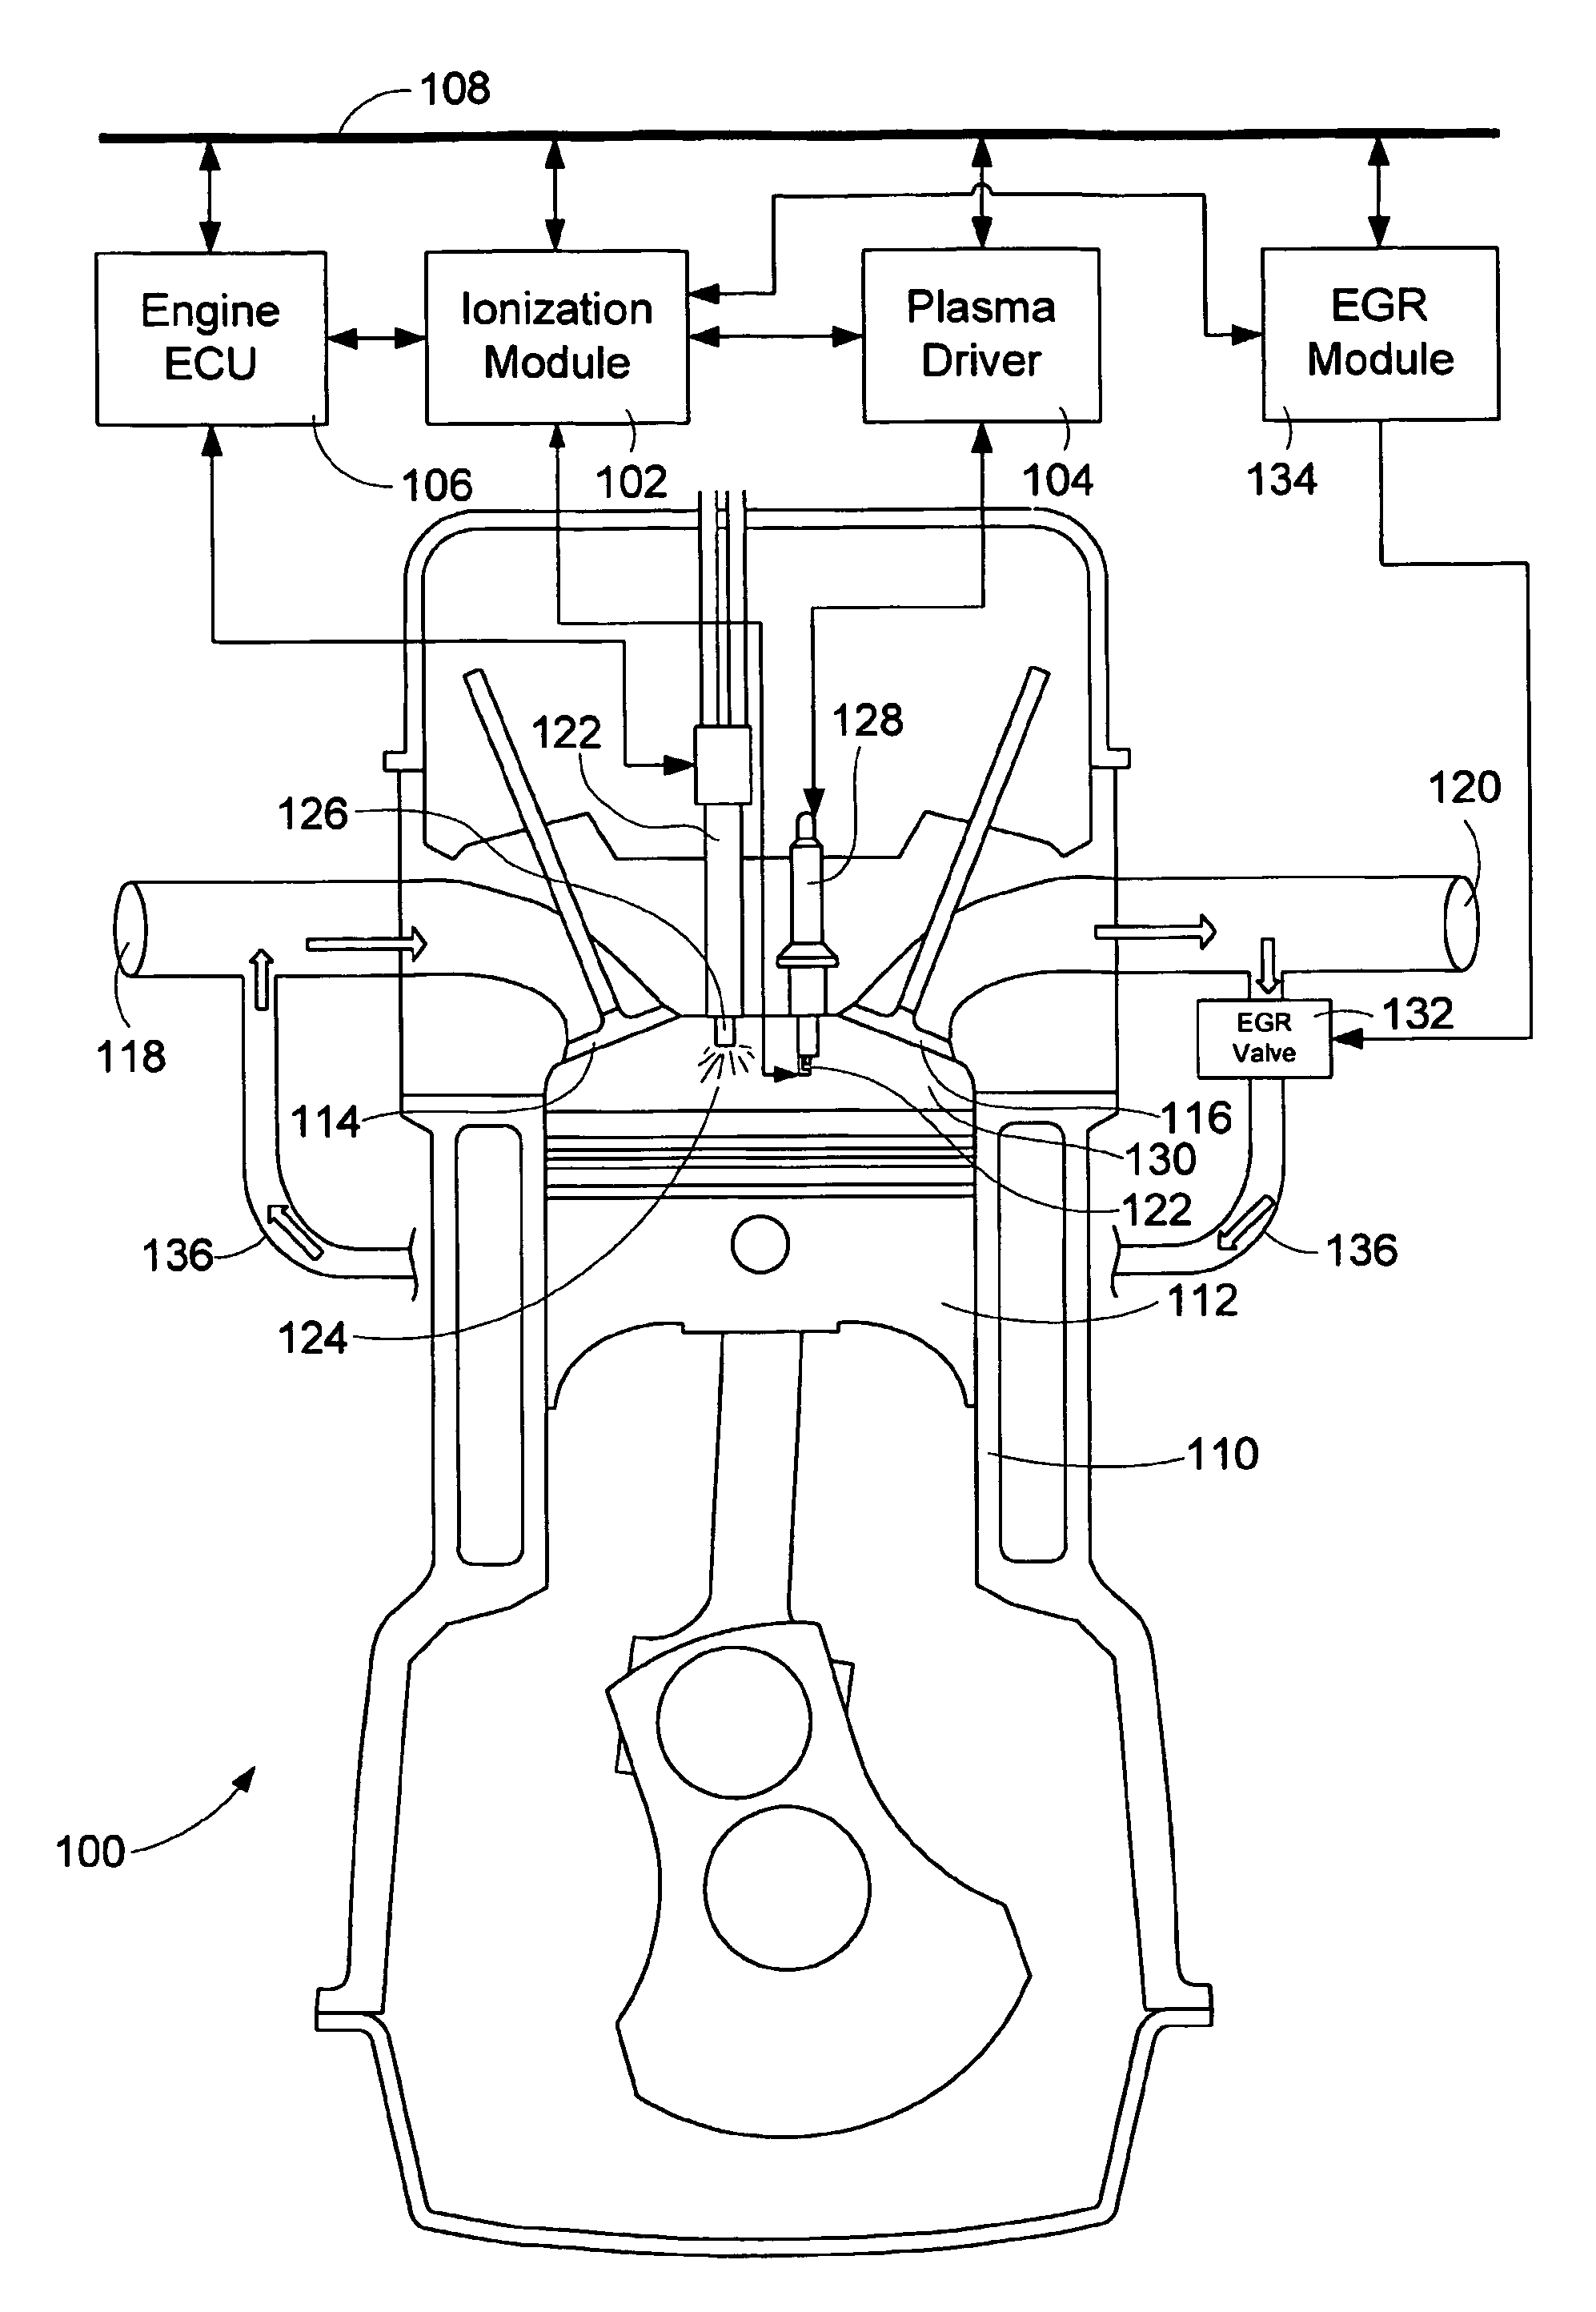 Method and apparatus for controlling exhaust gas recirculation and start of combustion in reciprocating compression ignition engines with an ignition system with ionization measurement